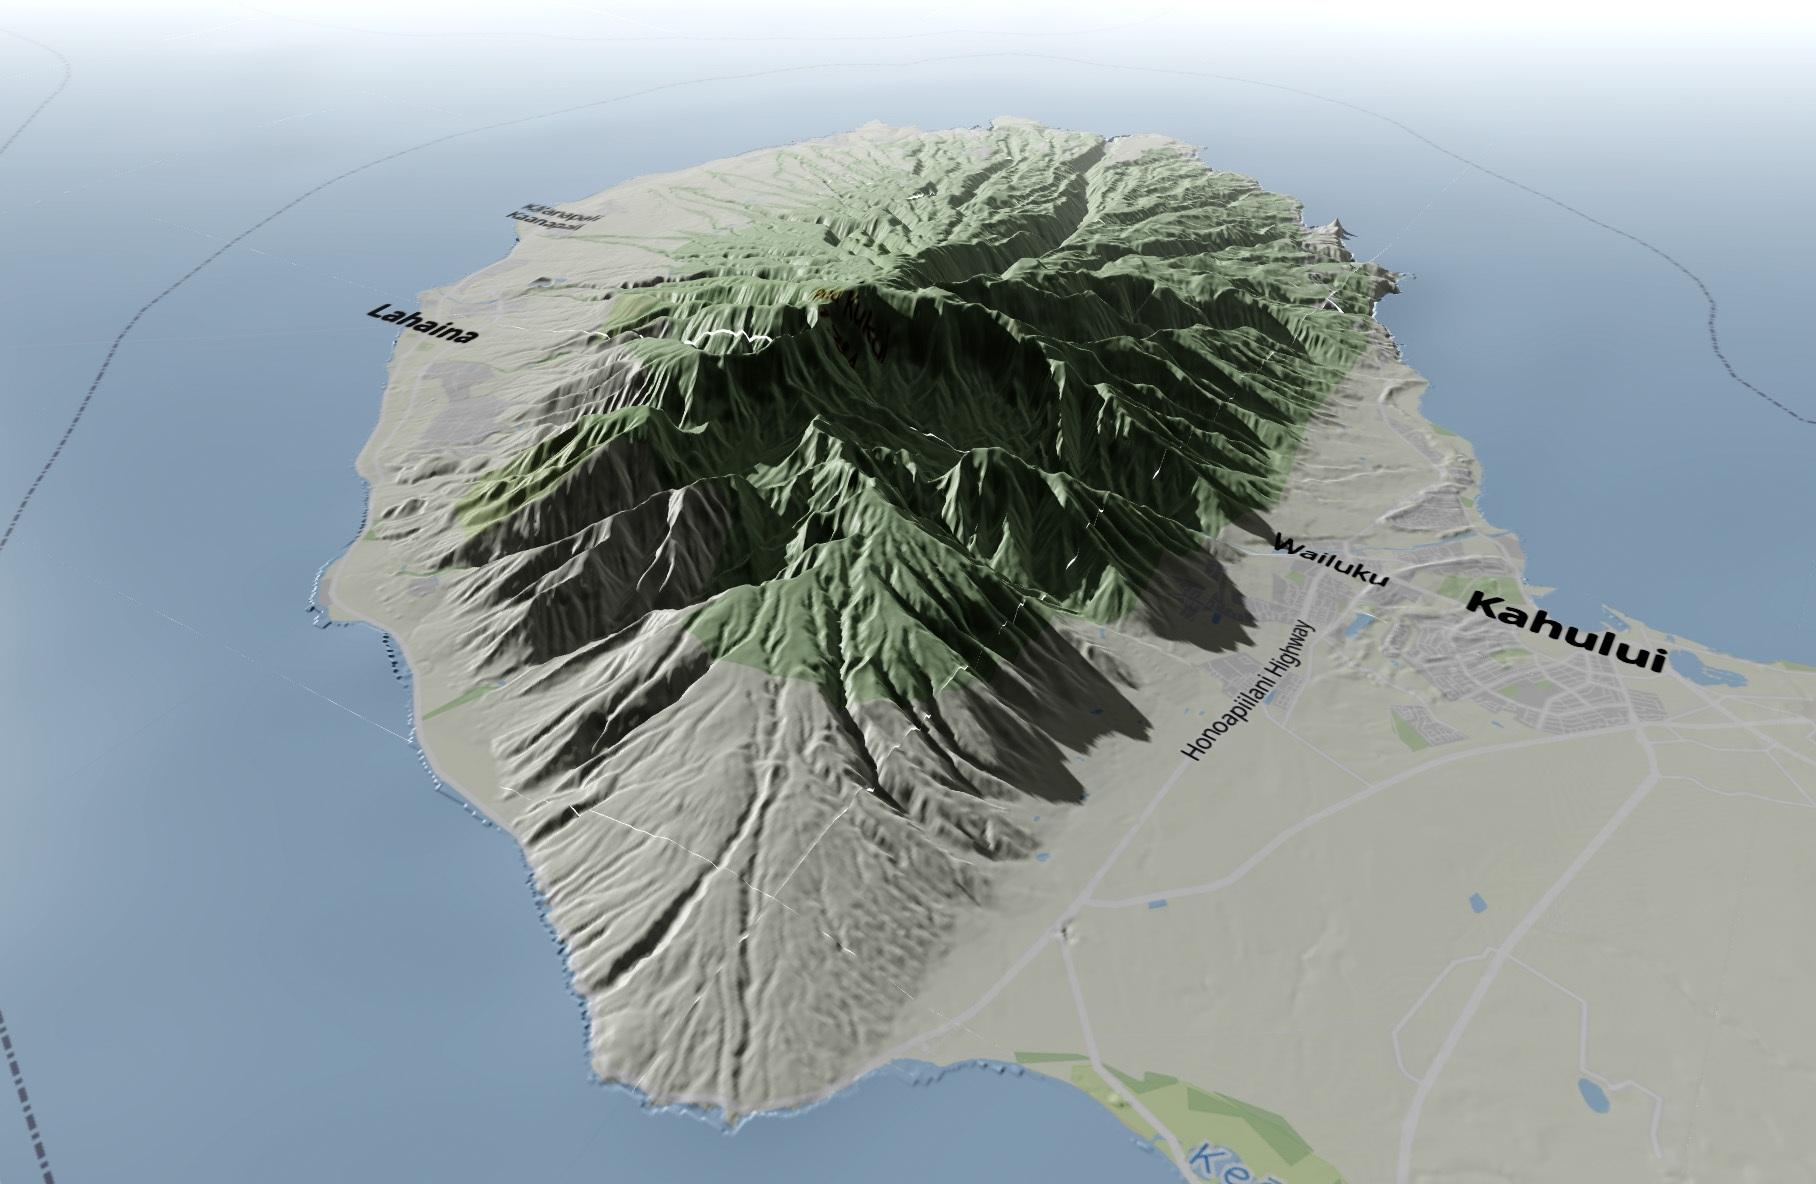 Maui shown in Shadowmap